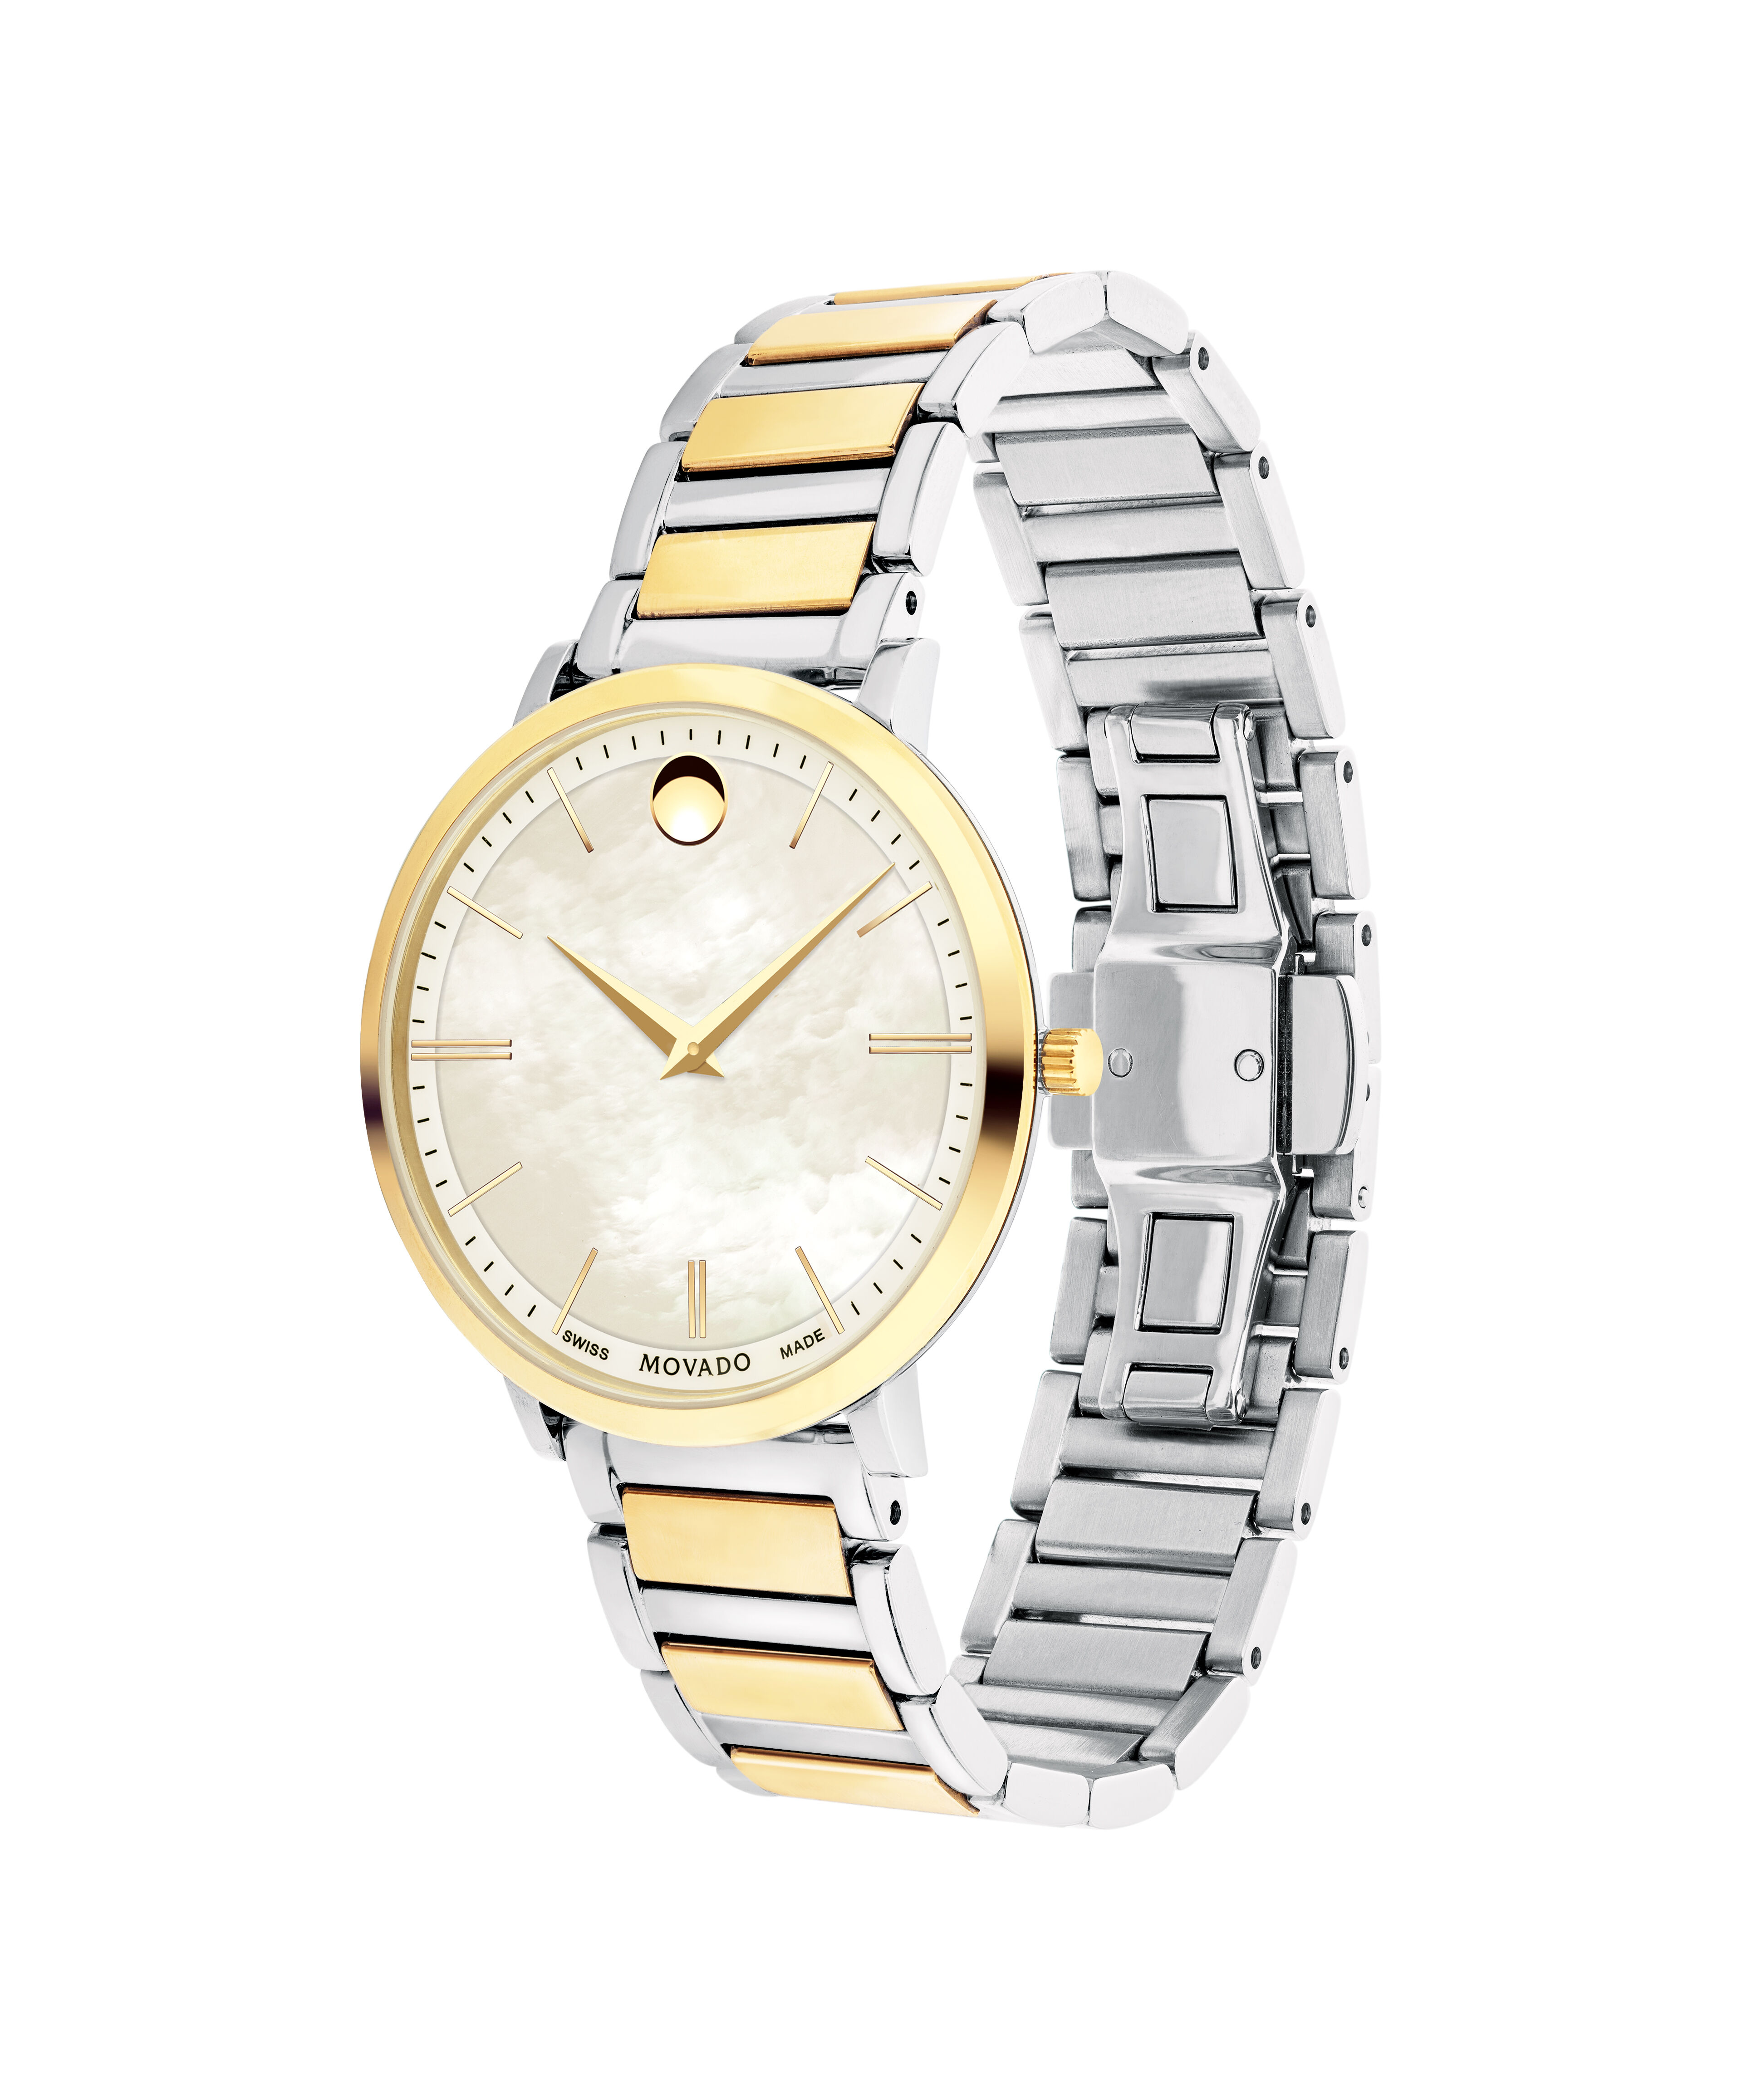 Fake Gold Watch With Diamonds Sites